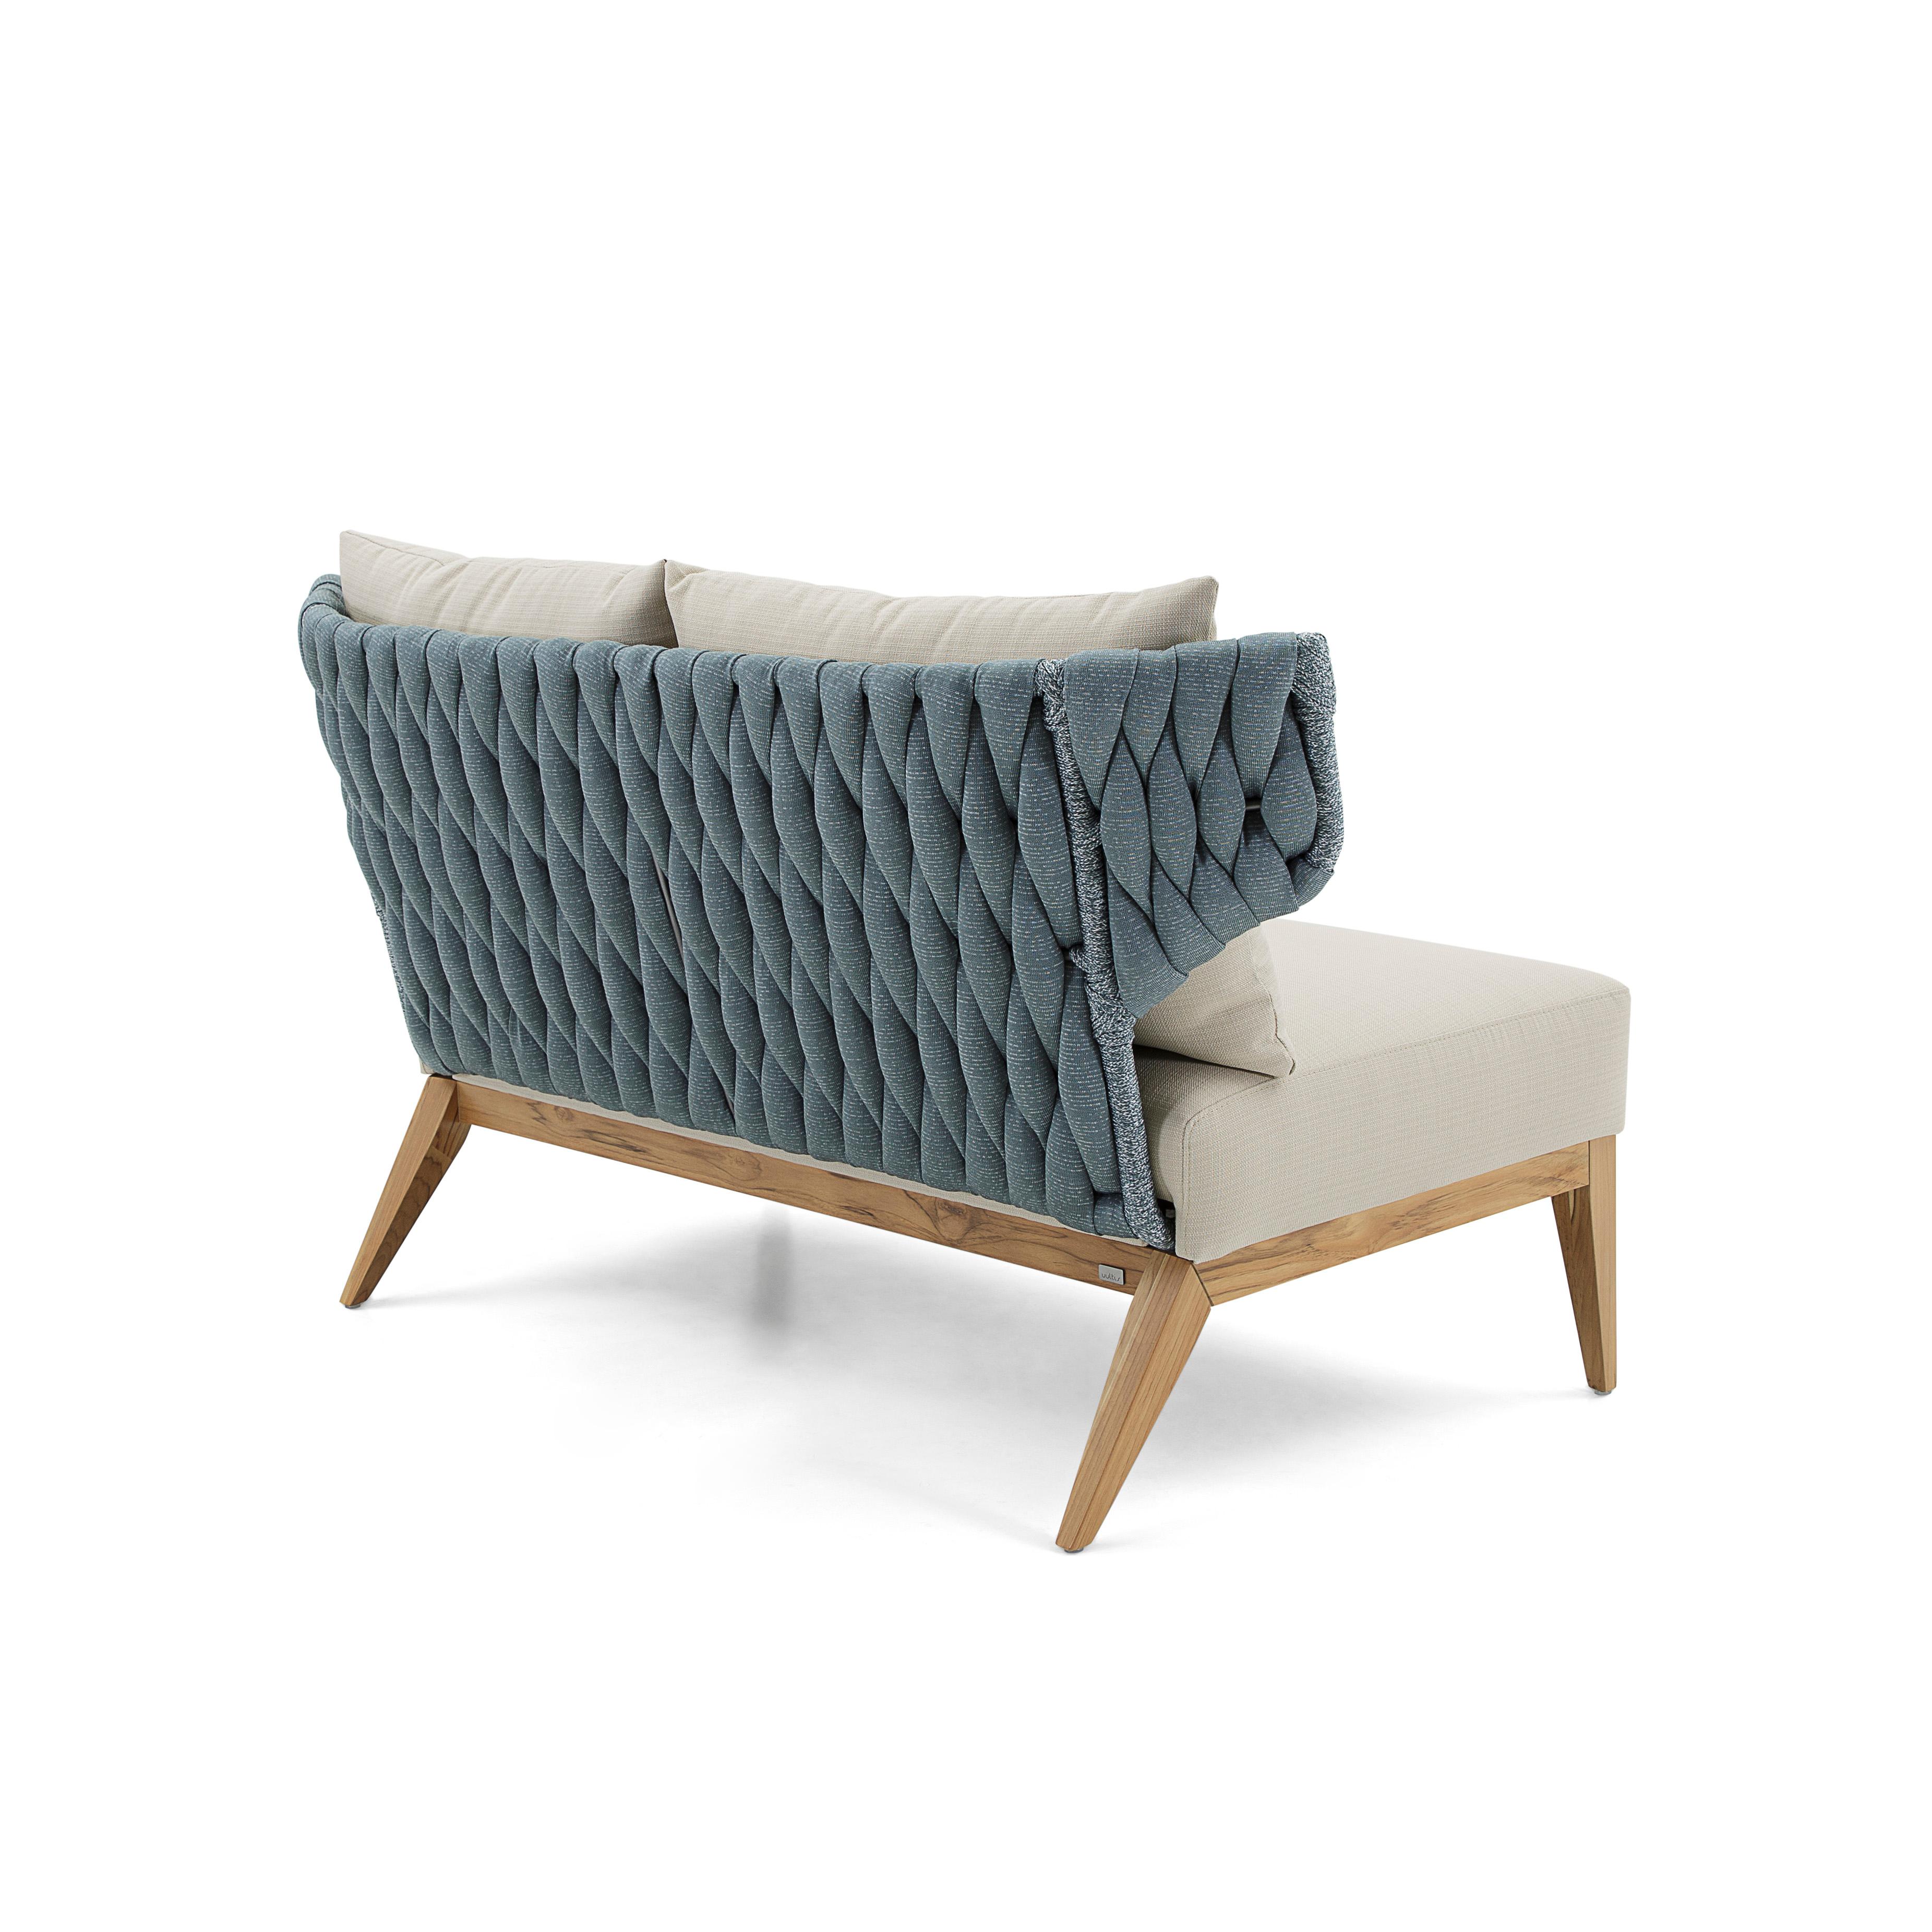 Brazilian Beluga Outdoor Loveseat in Beige and Blue fabric and Teak wood For Sale